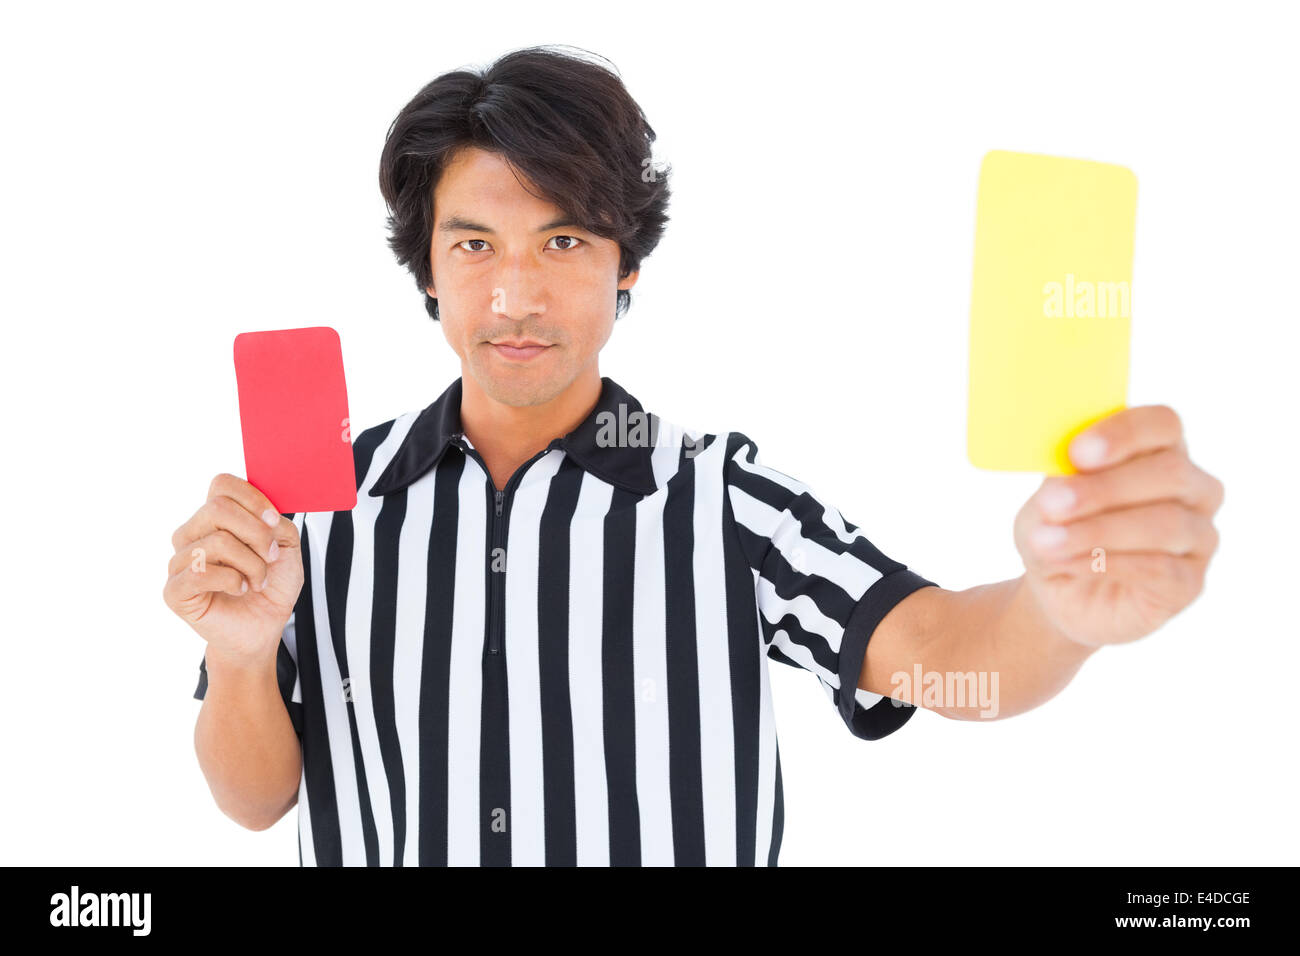 Stern referee showing yellow card Stock Photo